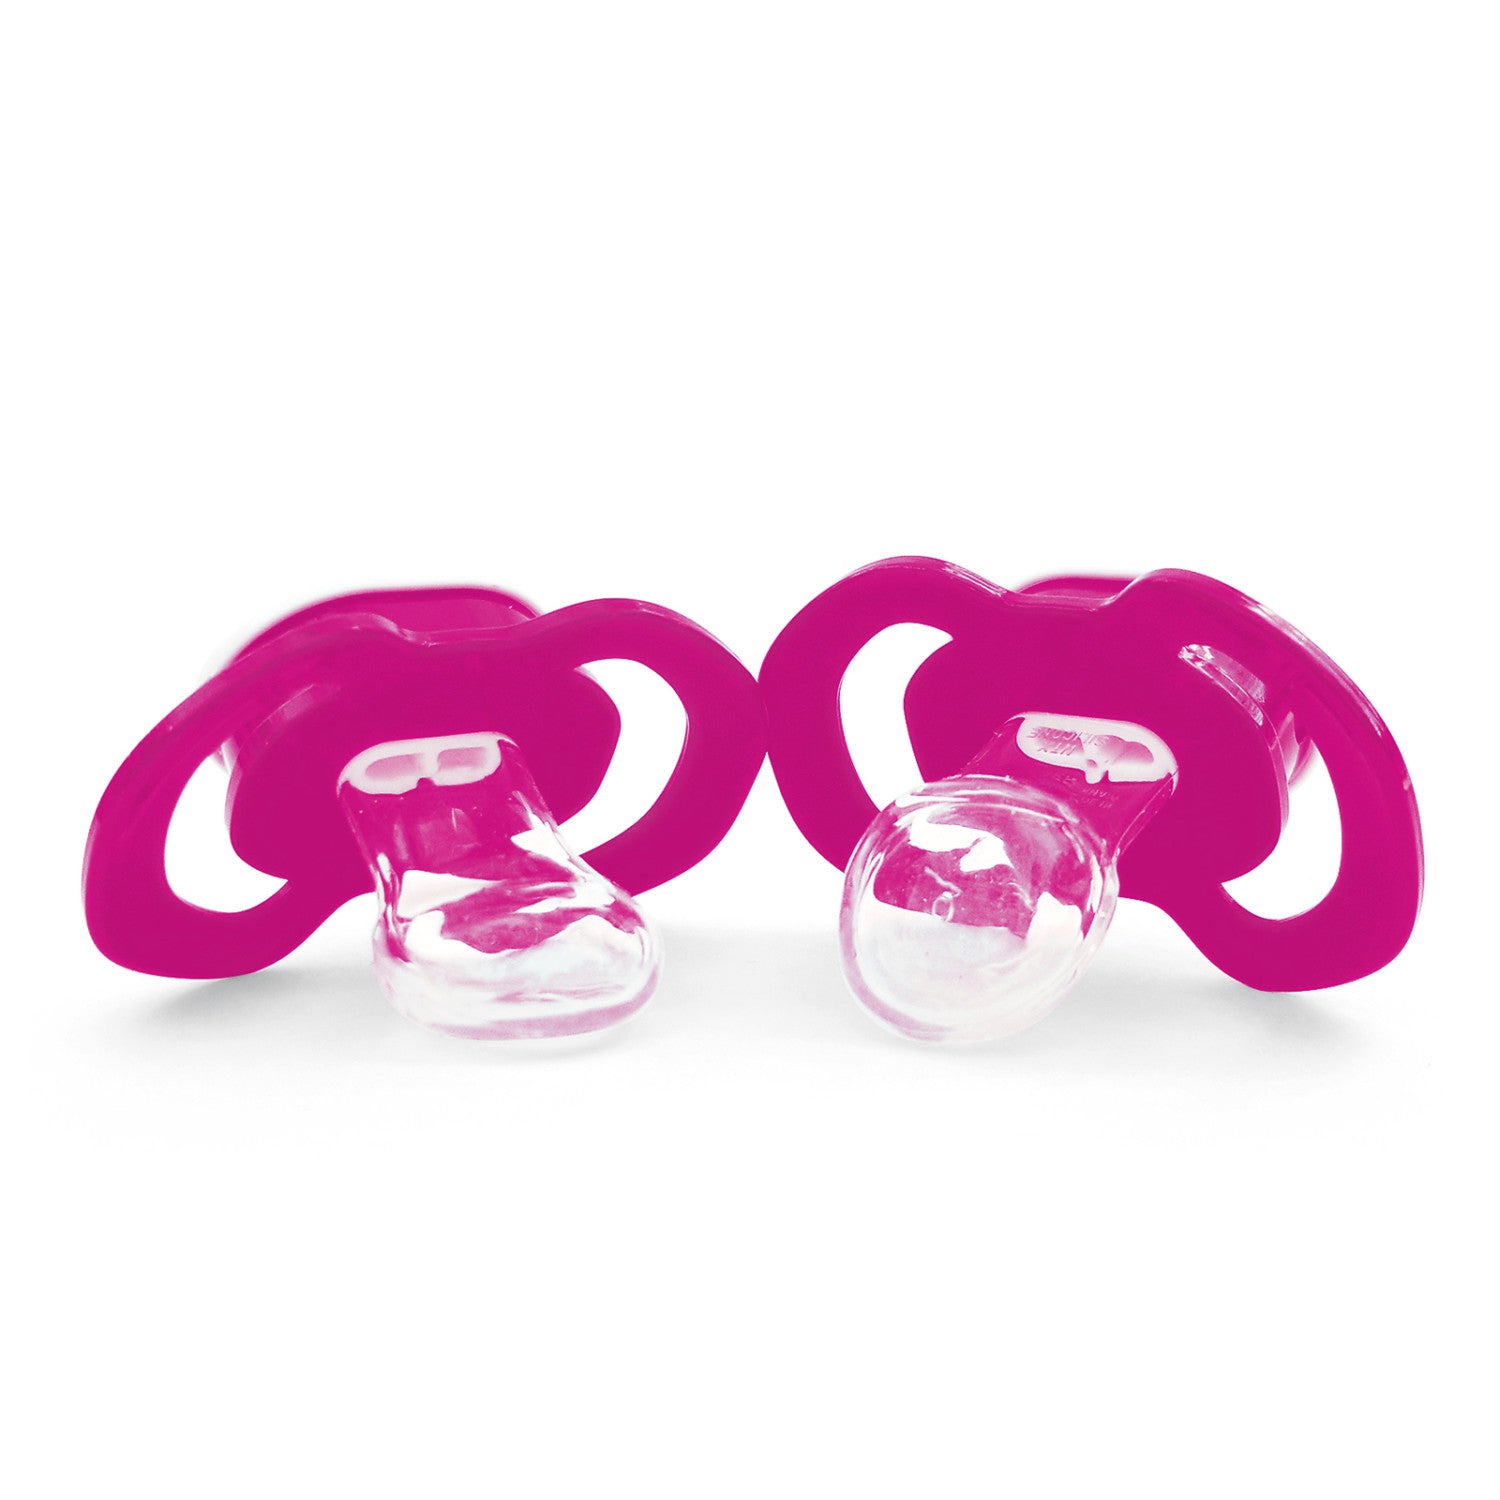 San Francisco 49ers NFL Pacifier 2-Pack - Pink